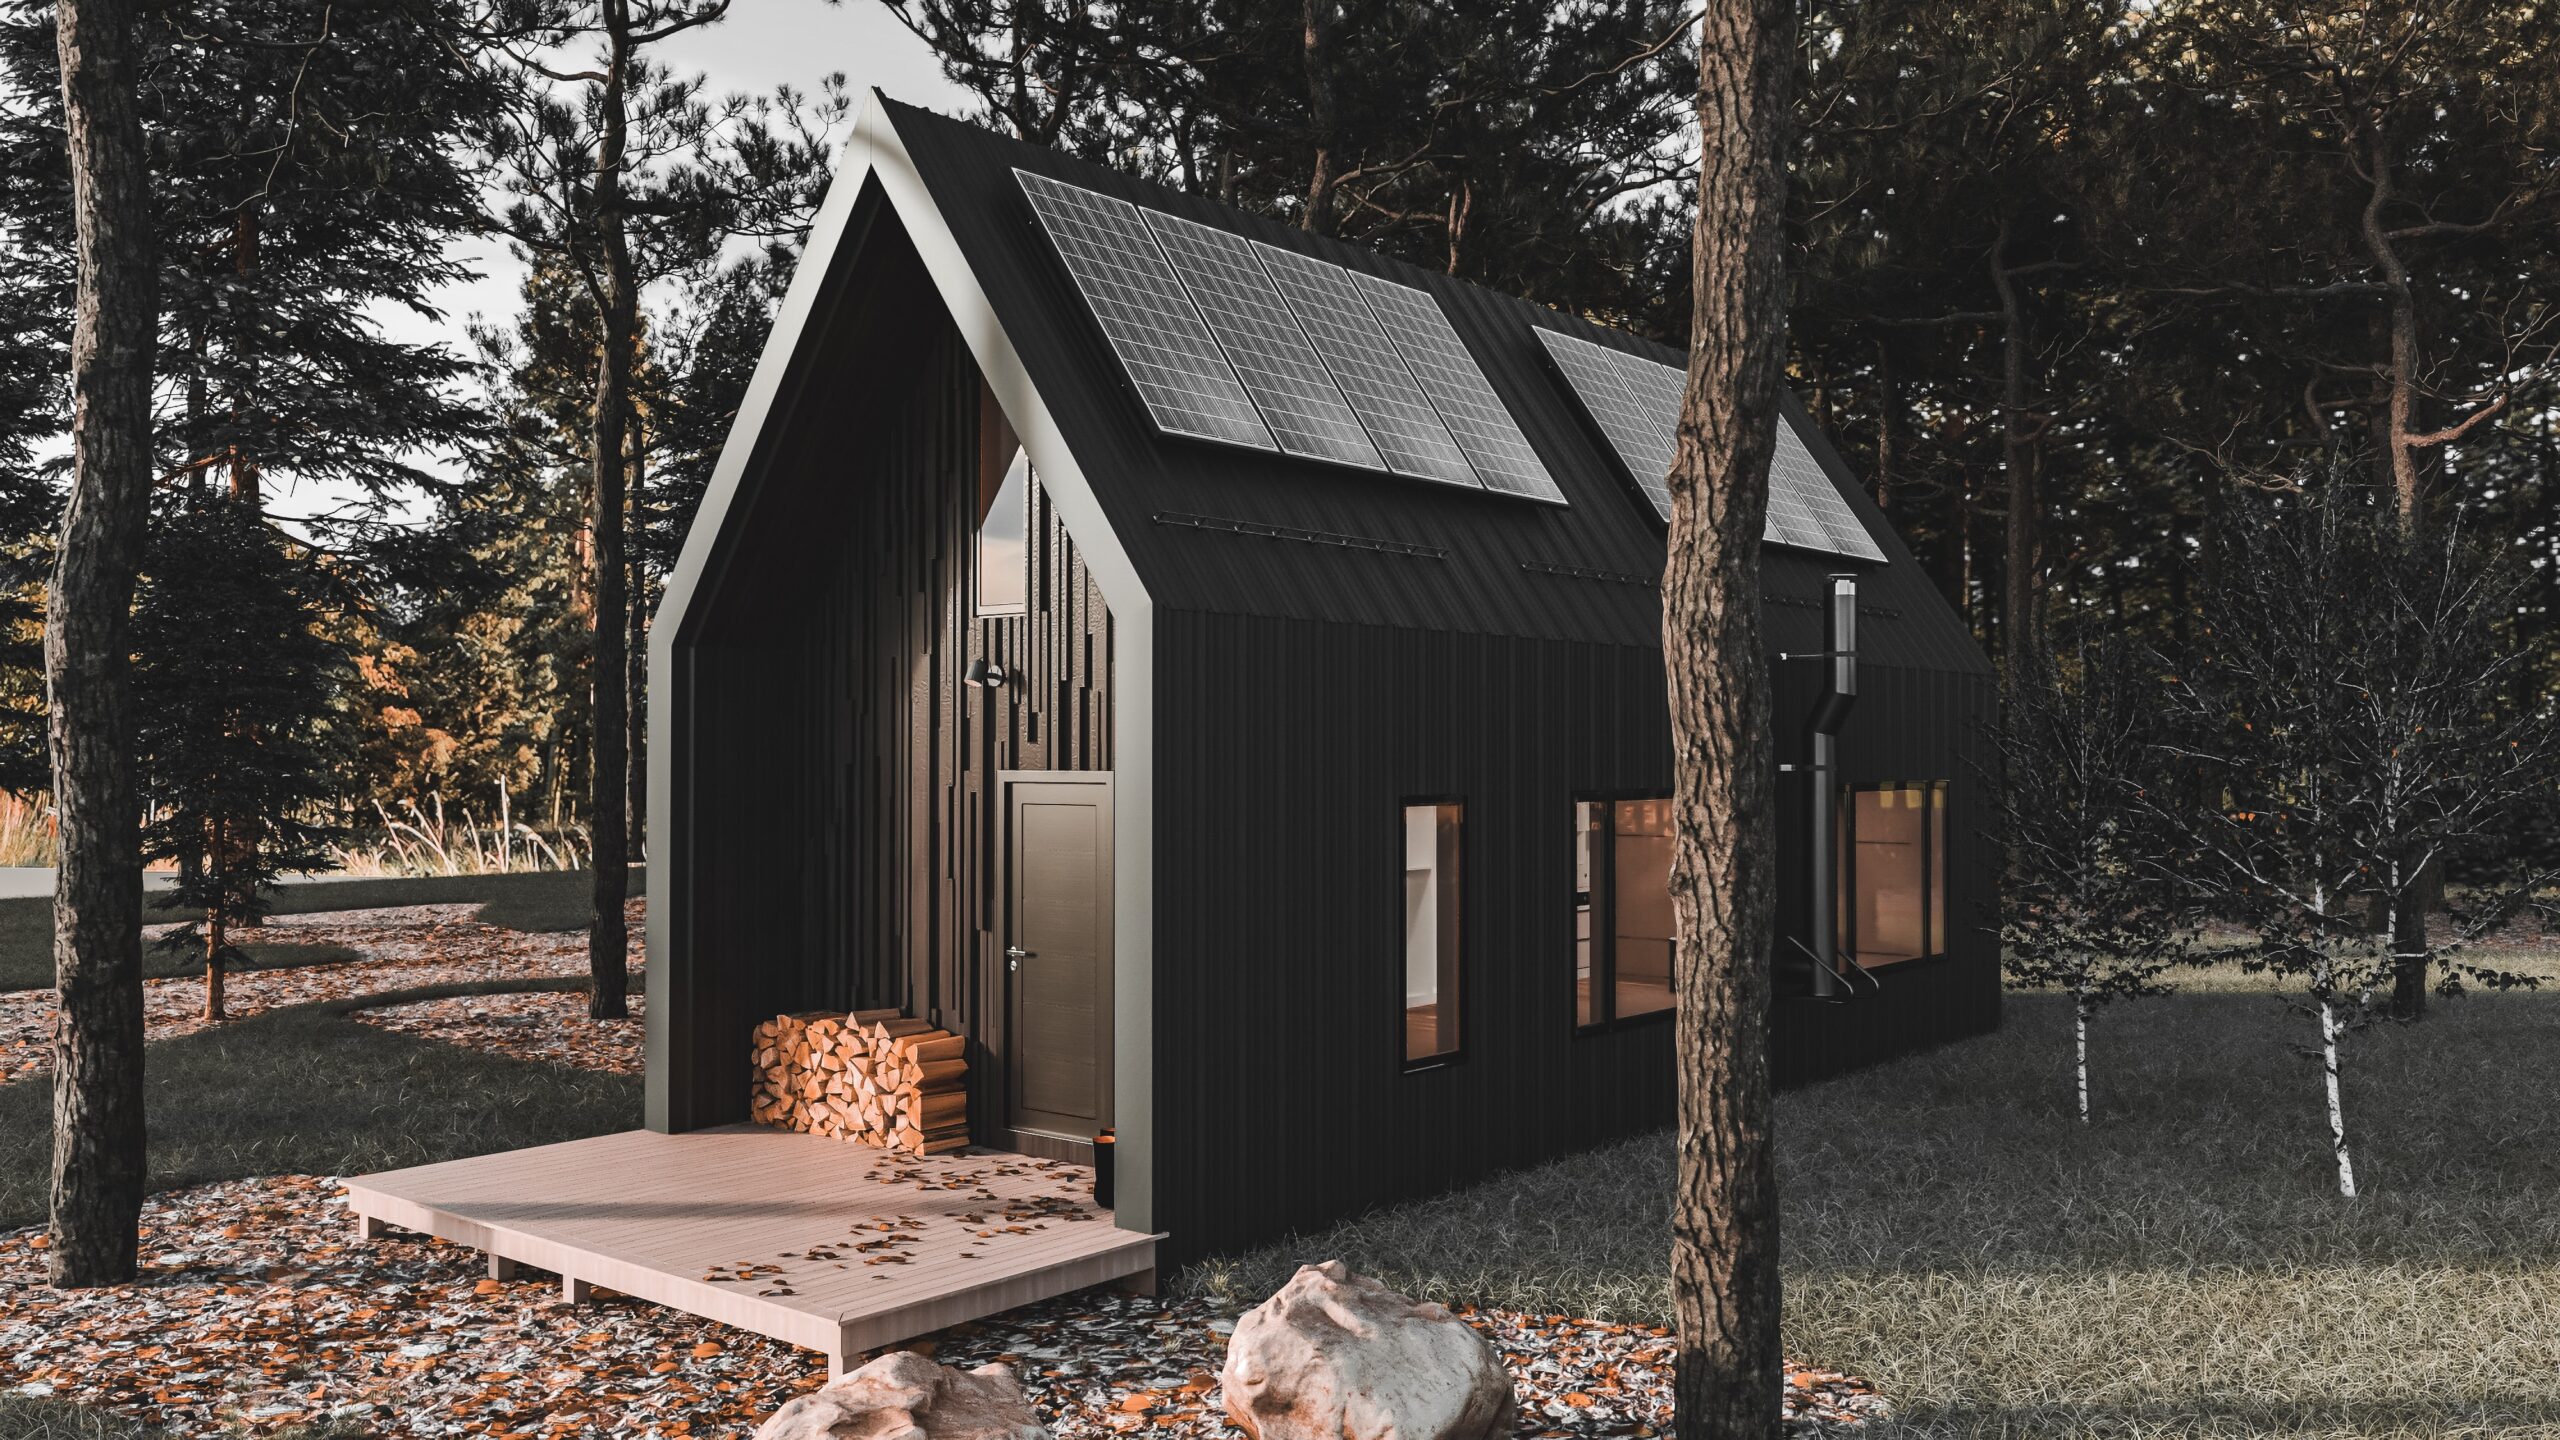 black, wooden A-frame cabin in the woods with solar panels on the roof